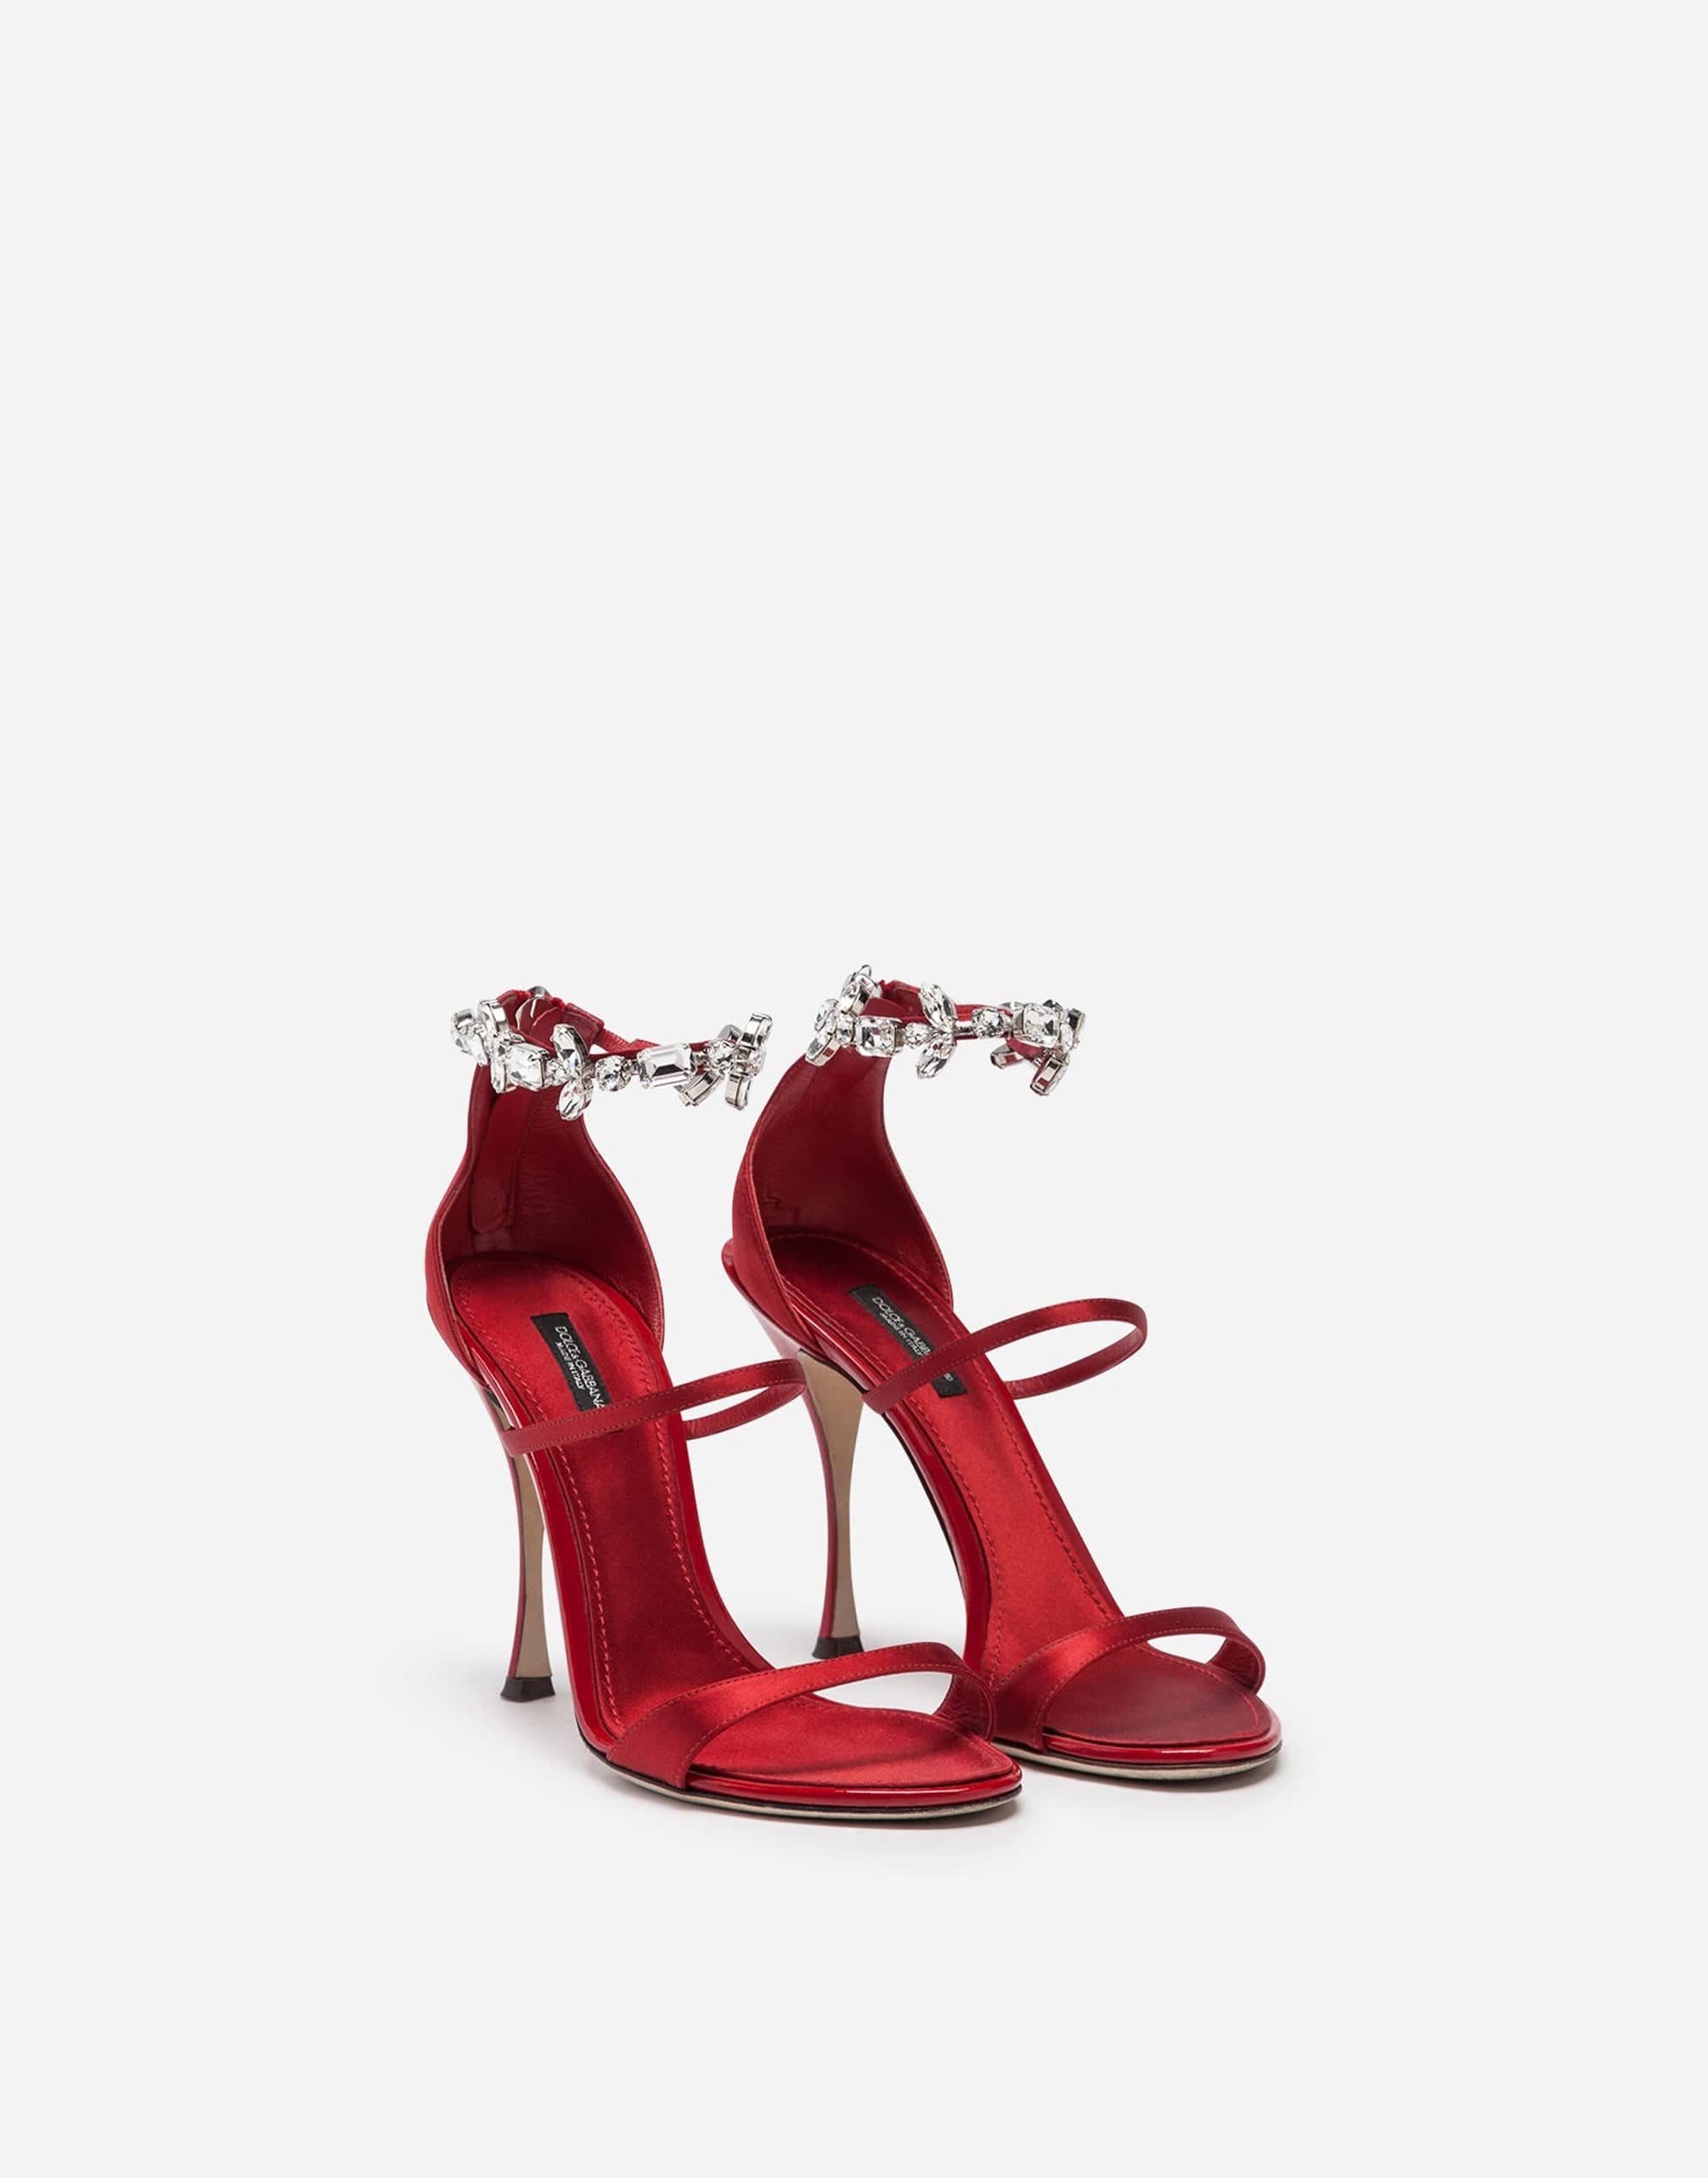 Dolce & Gabbana Satin Sandals With Embroidery